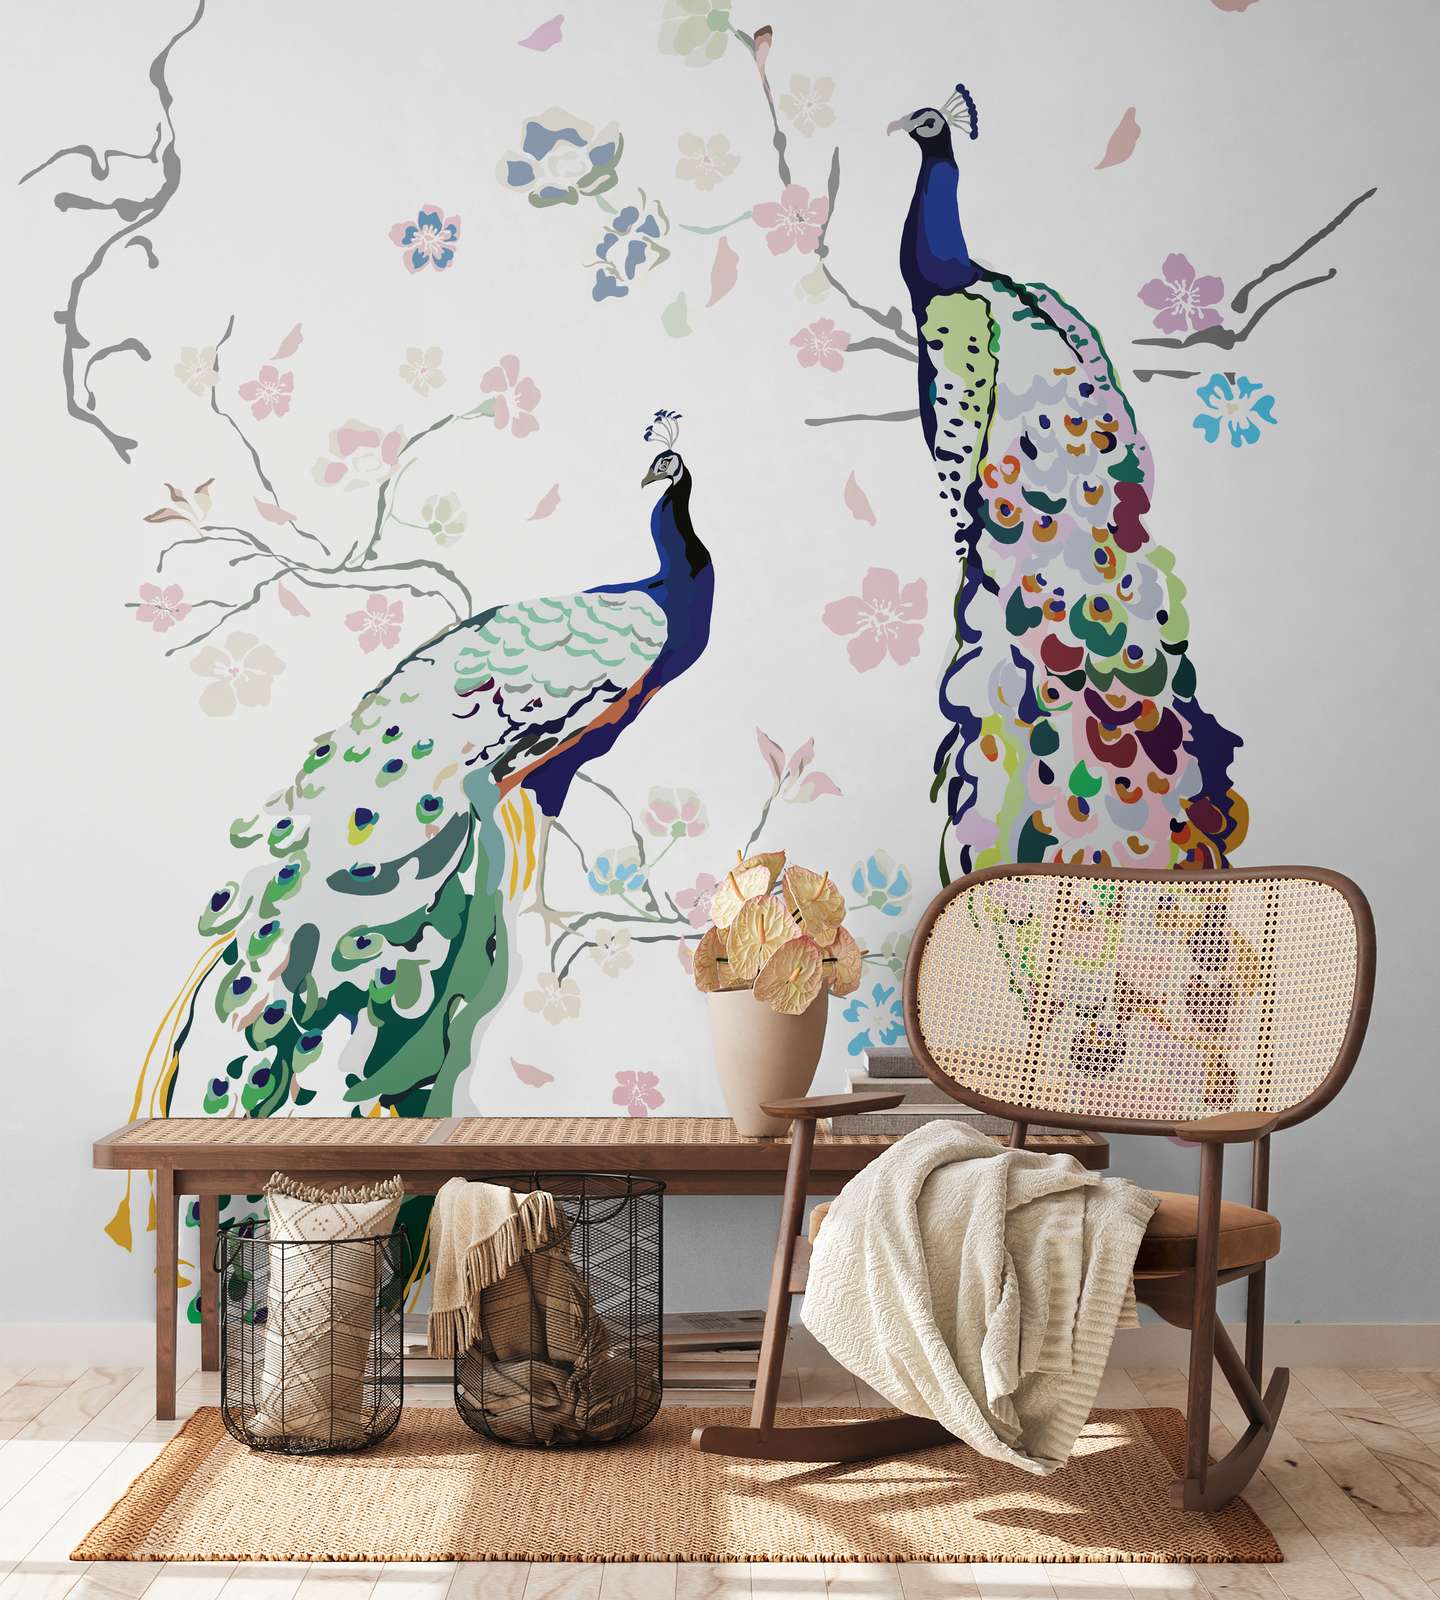             Non-woven wallpaper with peacock and flowers - white, colourful, blue, green, pink
        